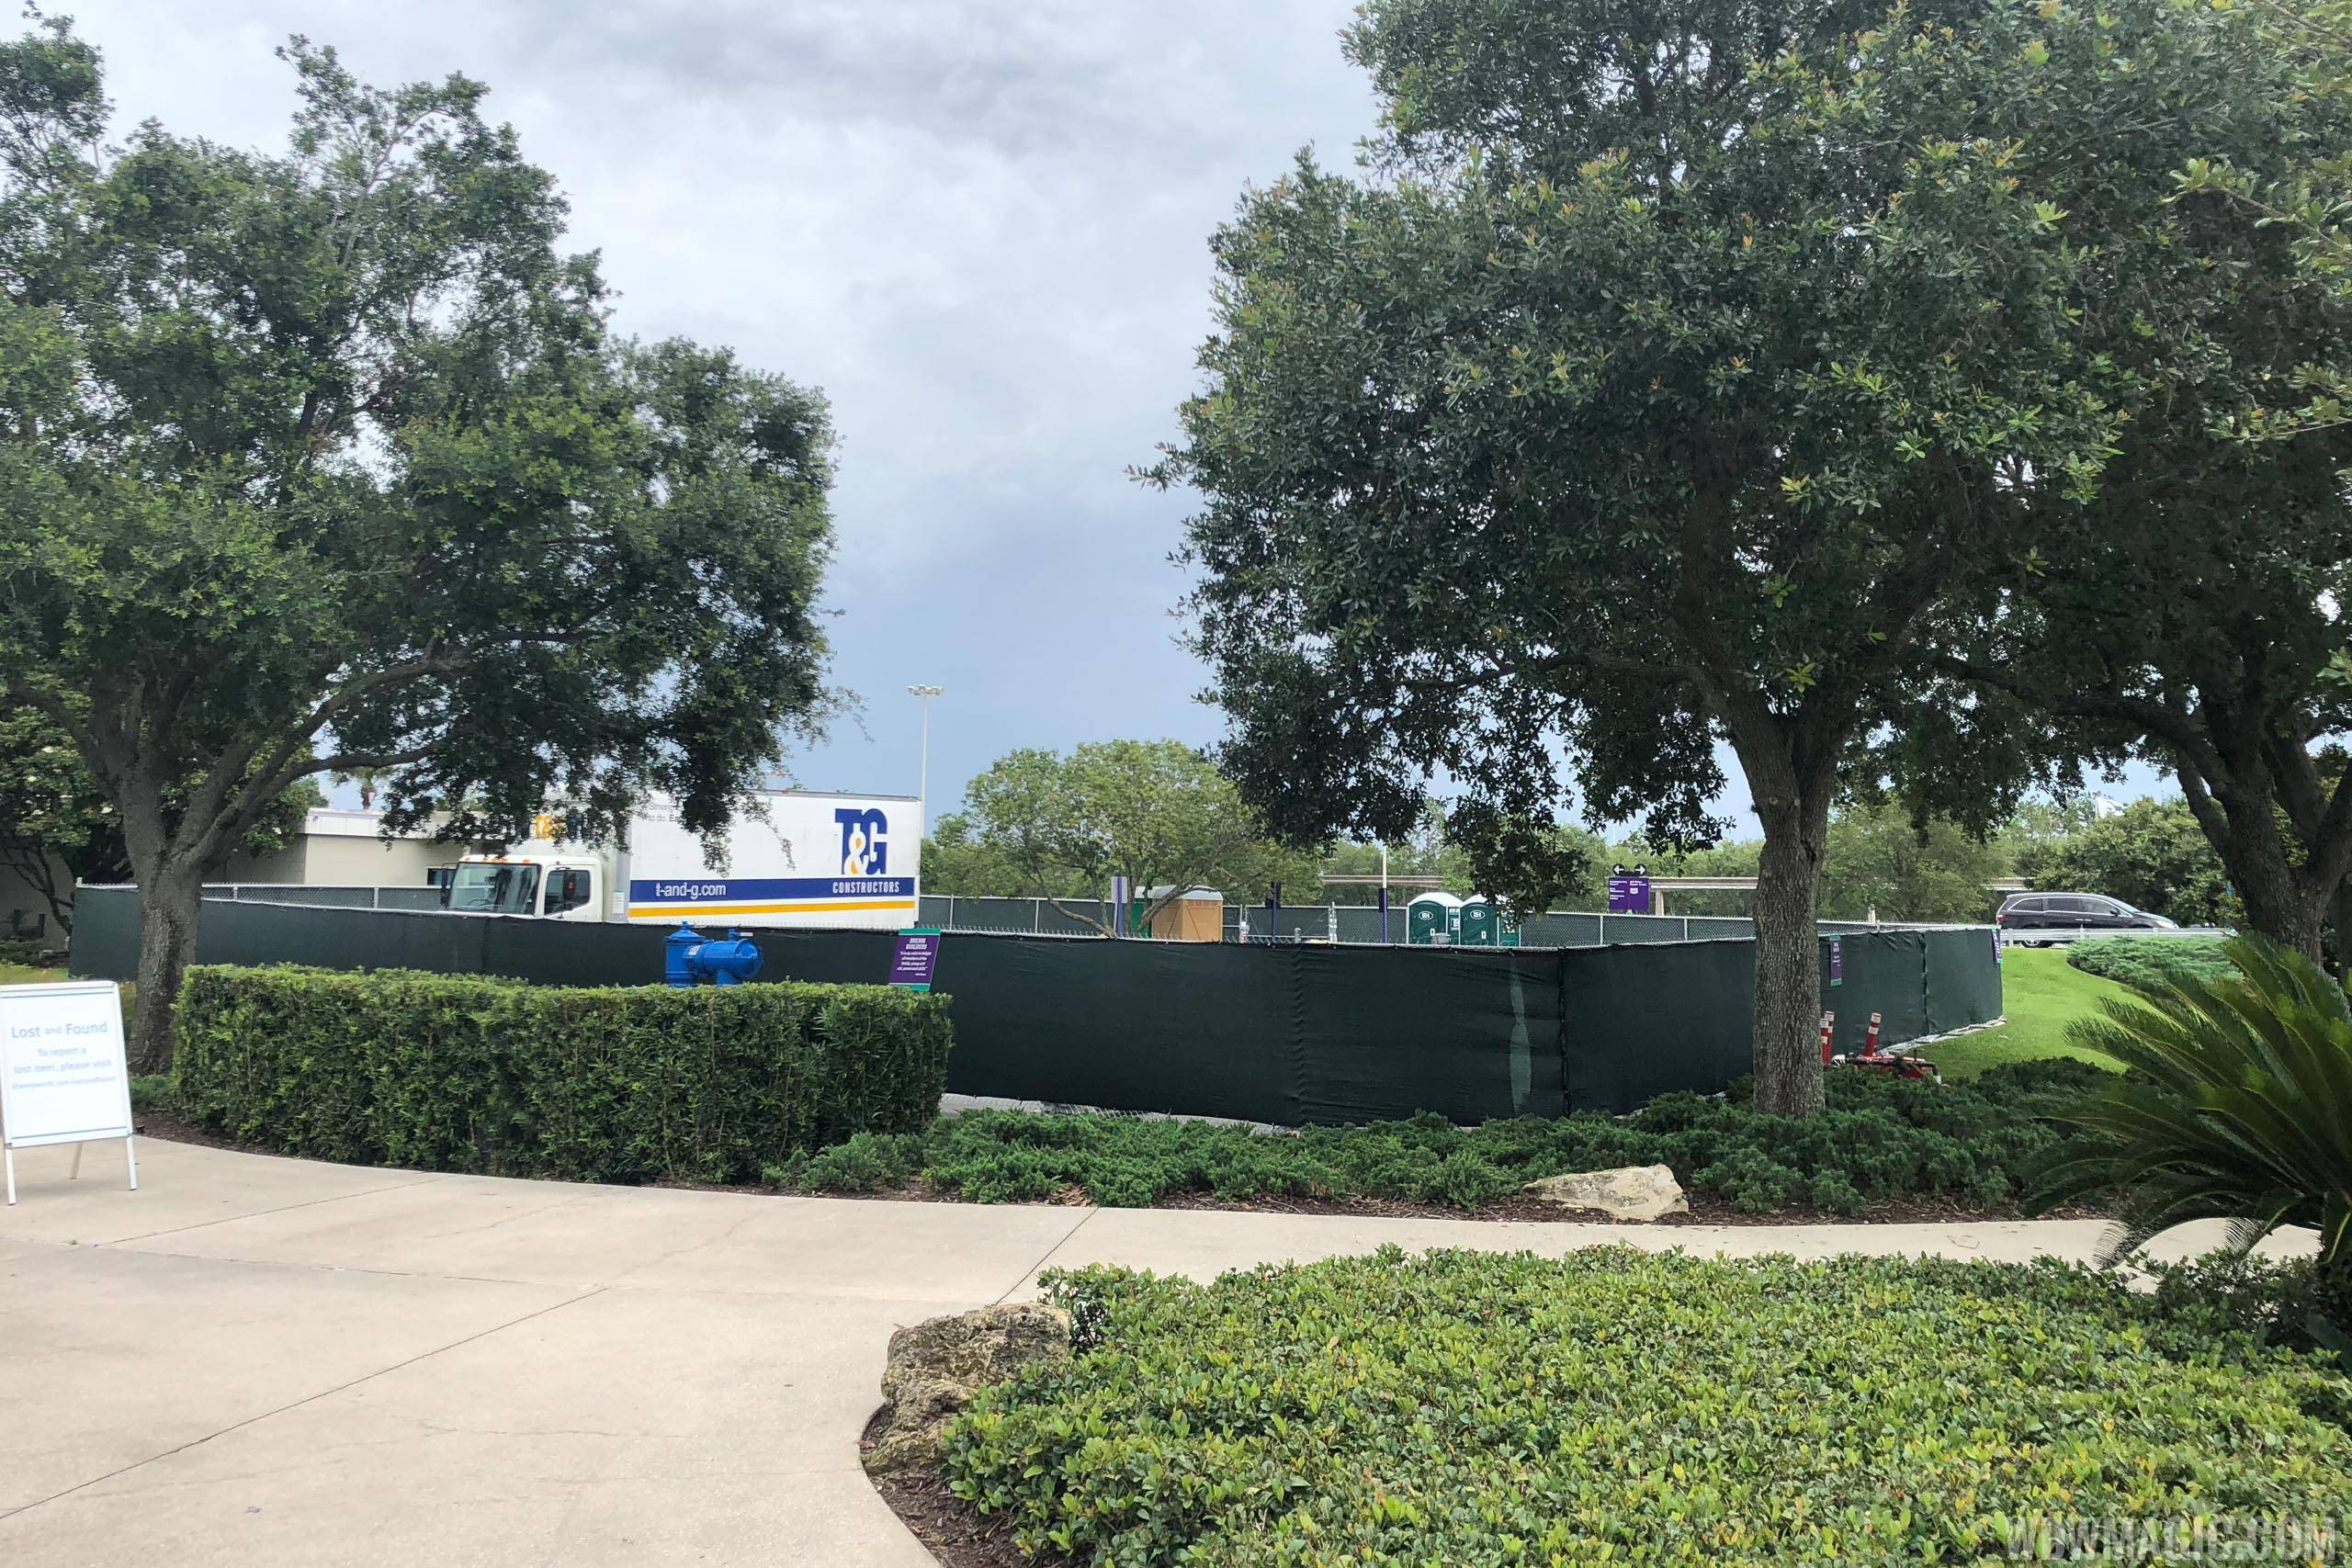 PHOTOS - Walls up around former Lost and Found center at the TTC